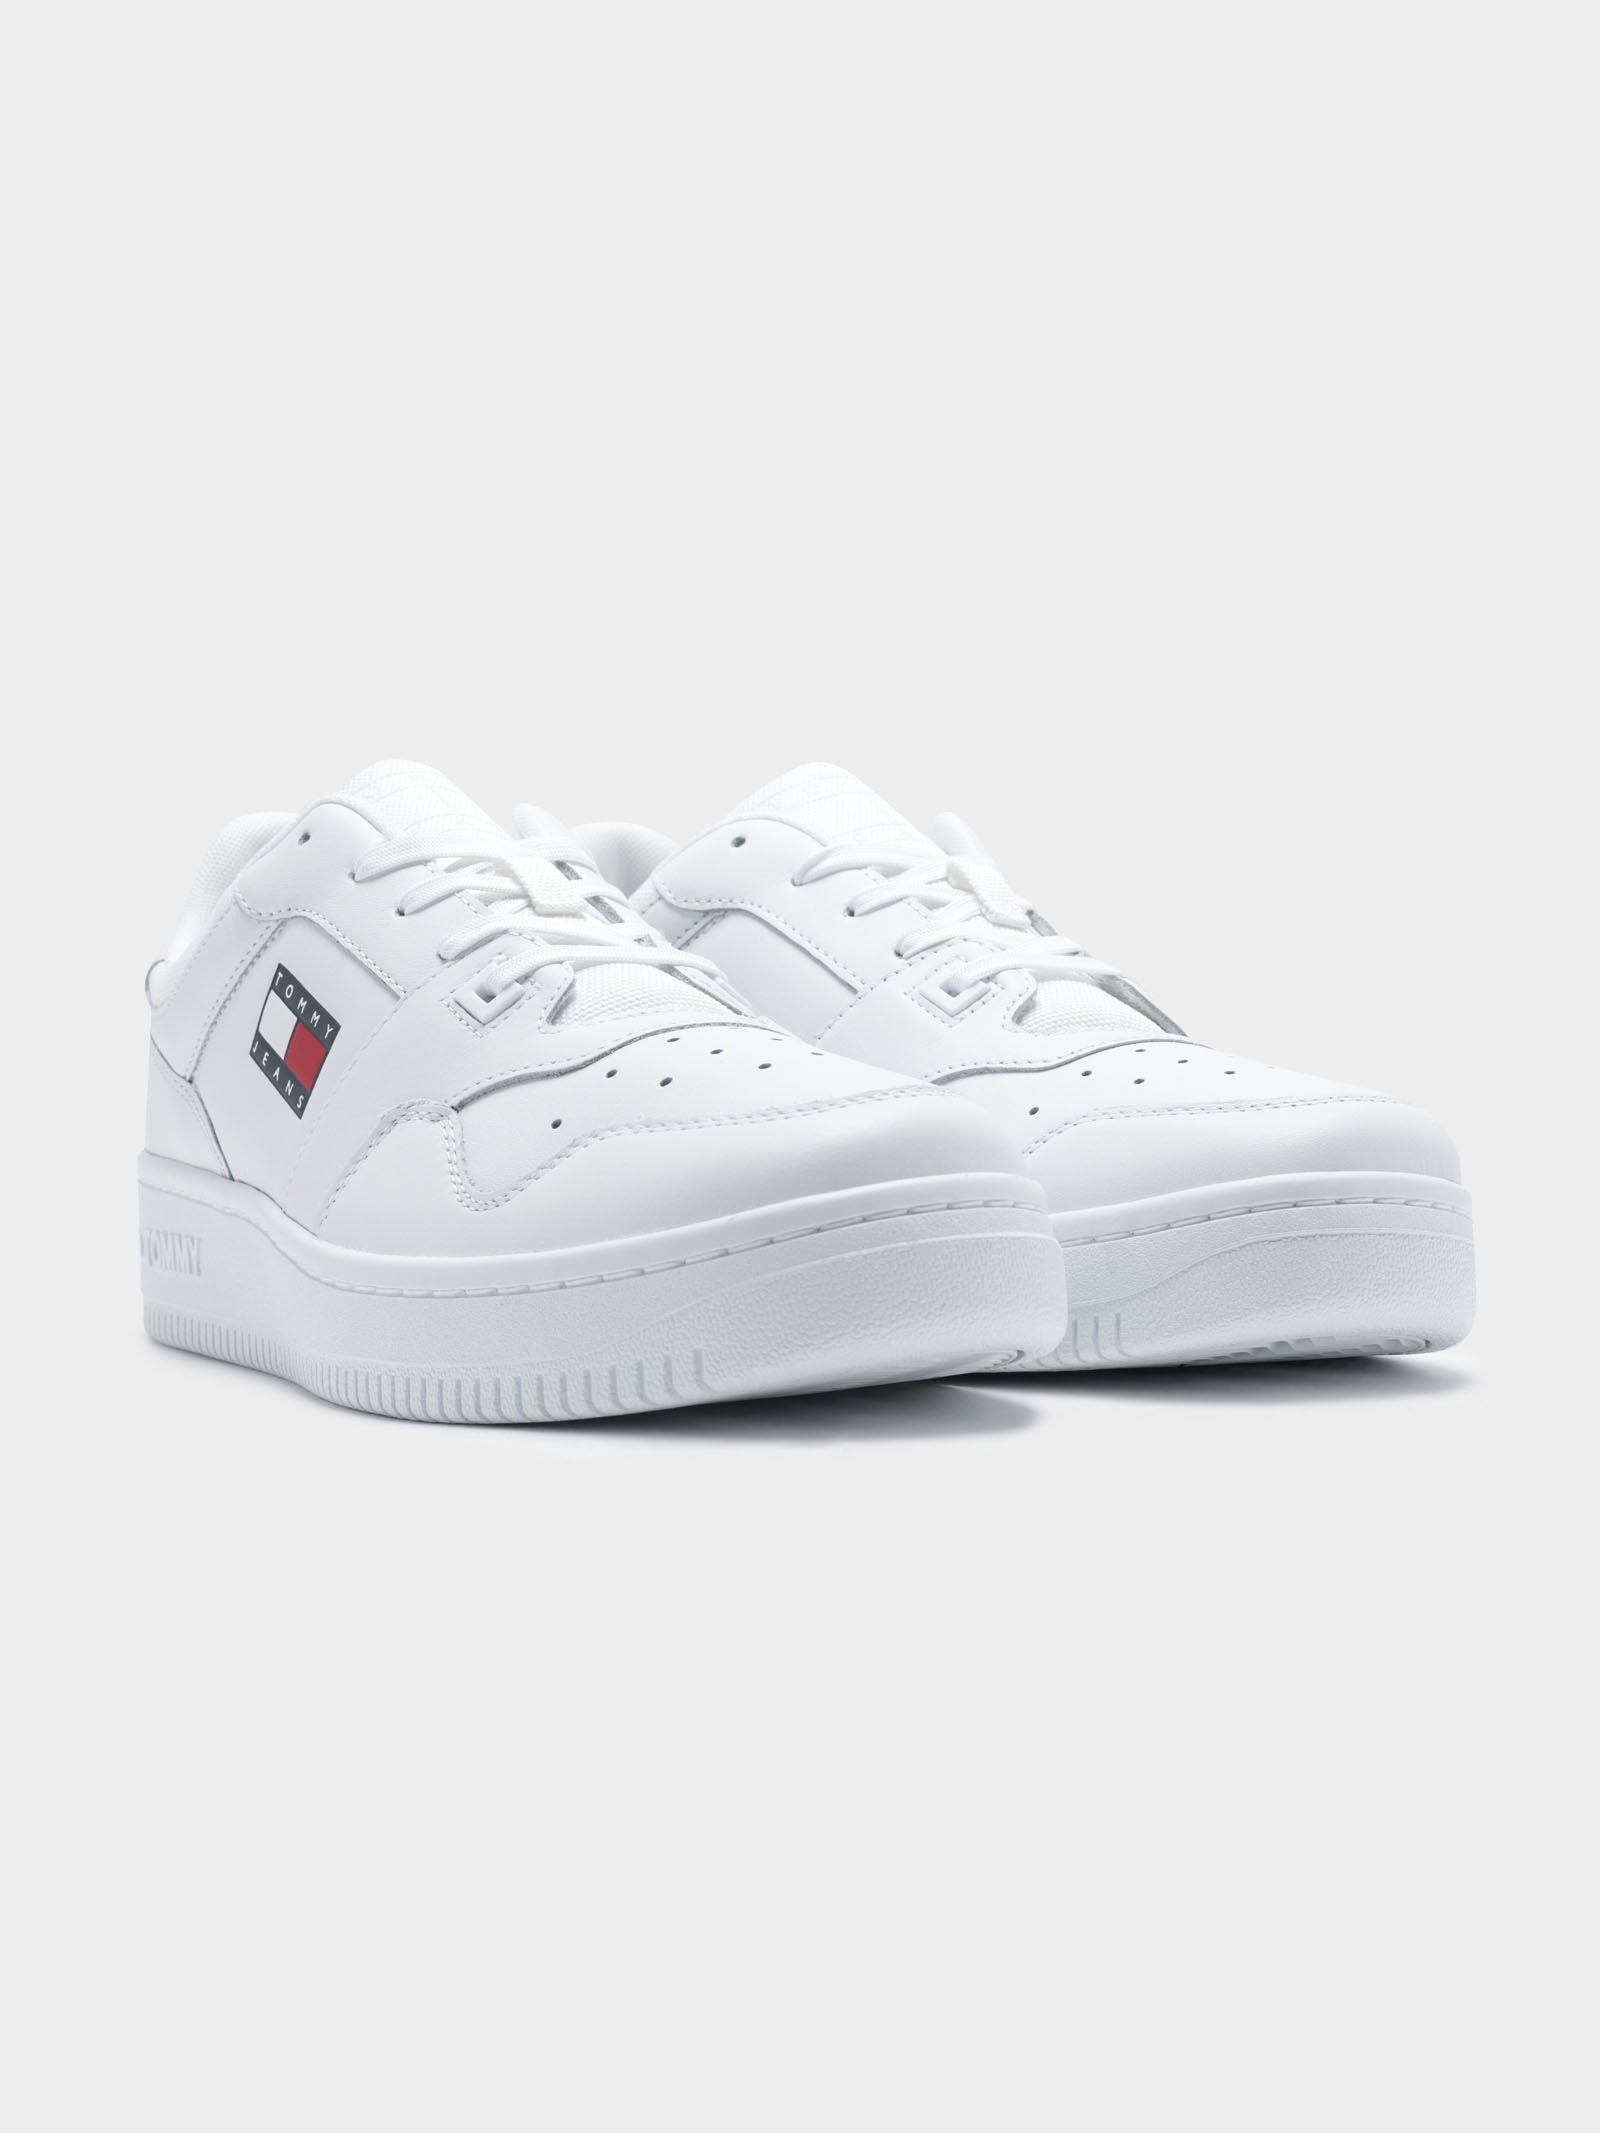 Mens Retro Leather Basket Trainers in White